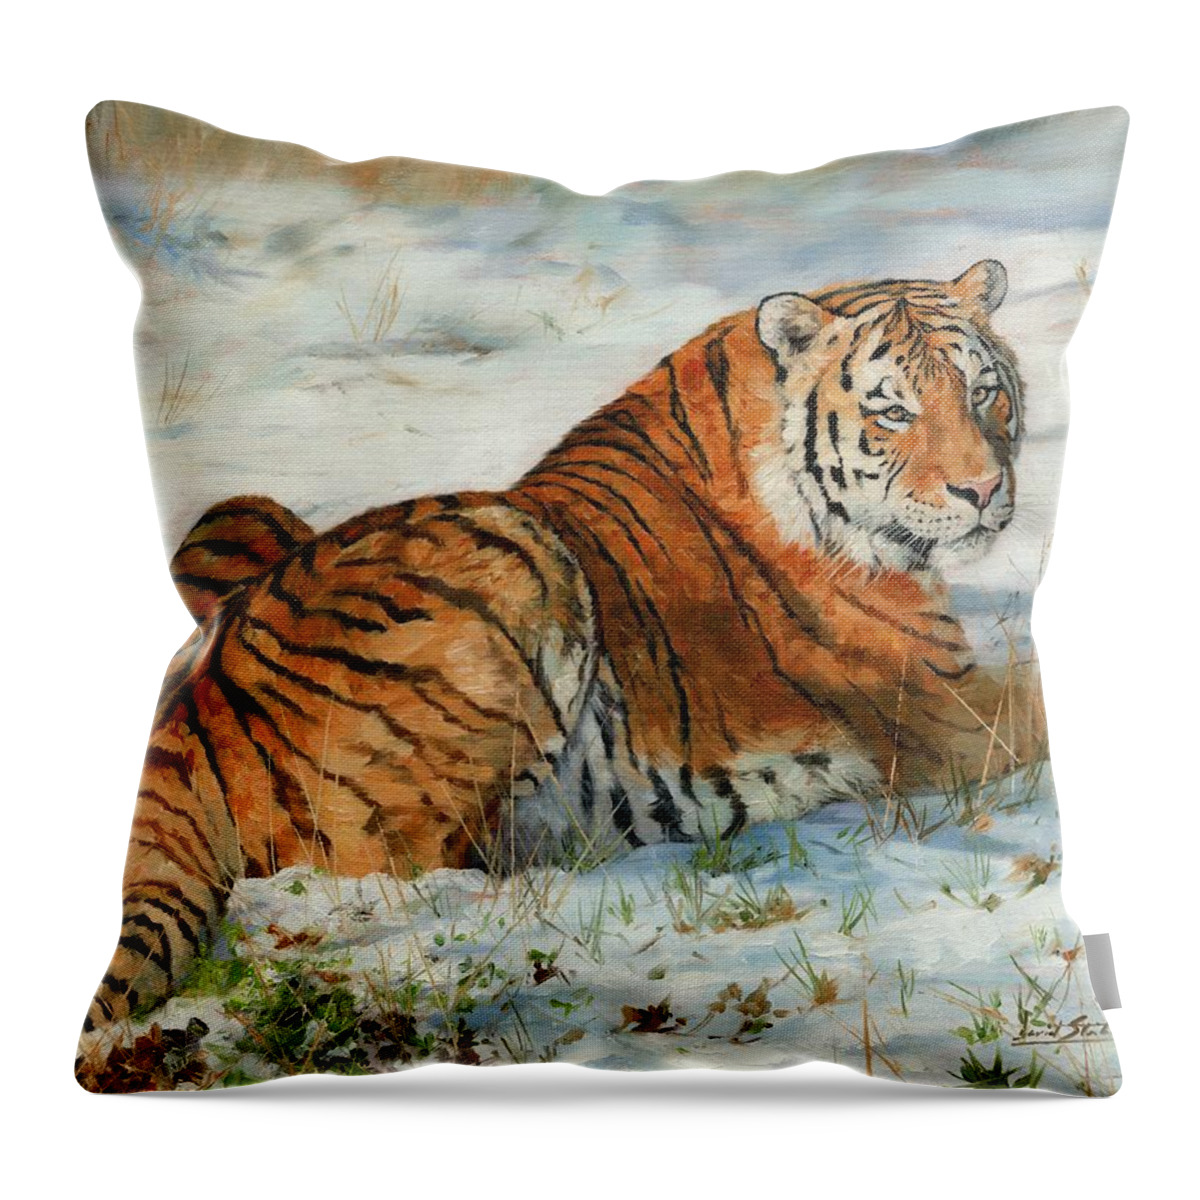 Tiger Throw Pillow featuring the painting Snow Tiger by David Stribbling